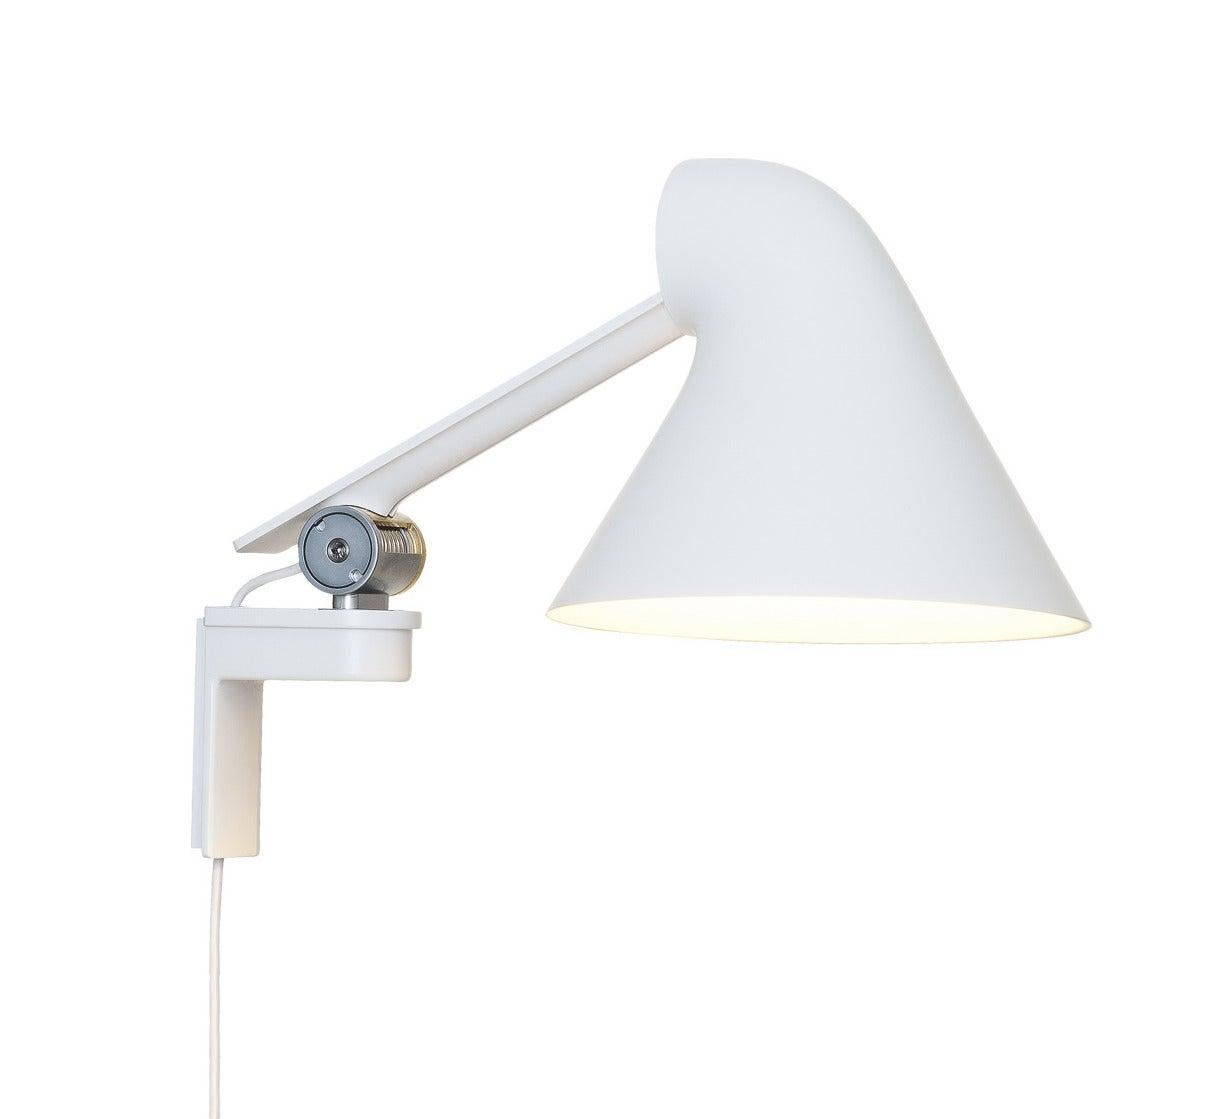 Louis Poulsen NJP Wall Short Lamp in Light Gray Aluminum by Nendo, Oki Sato In New Condition For Sale In New York, NY